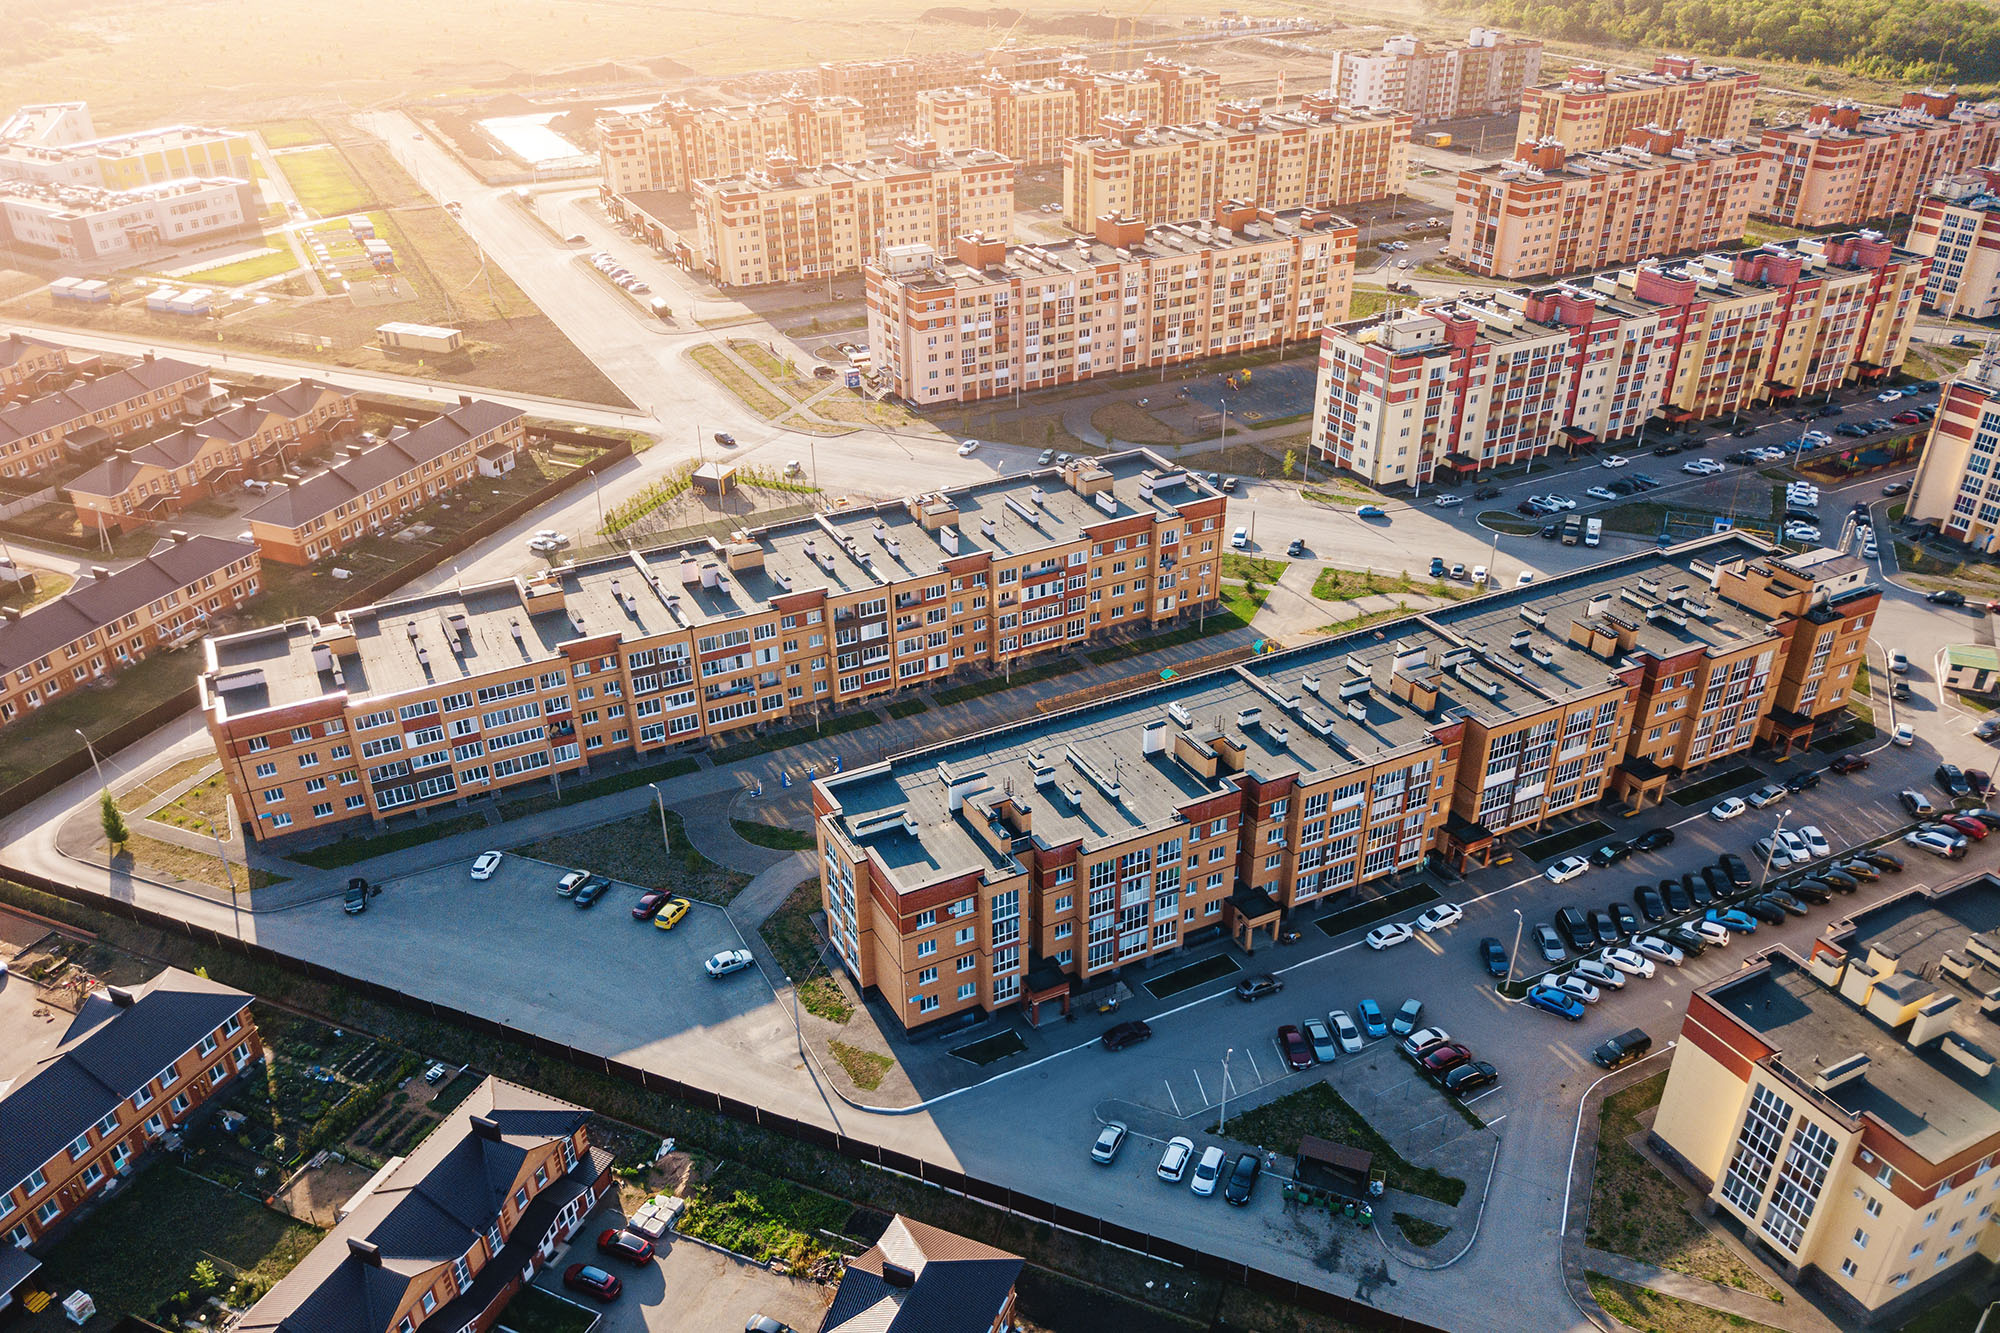 Residential quarter of the aerial suburb with a low-rise new housing development